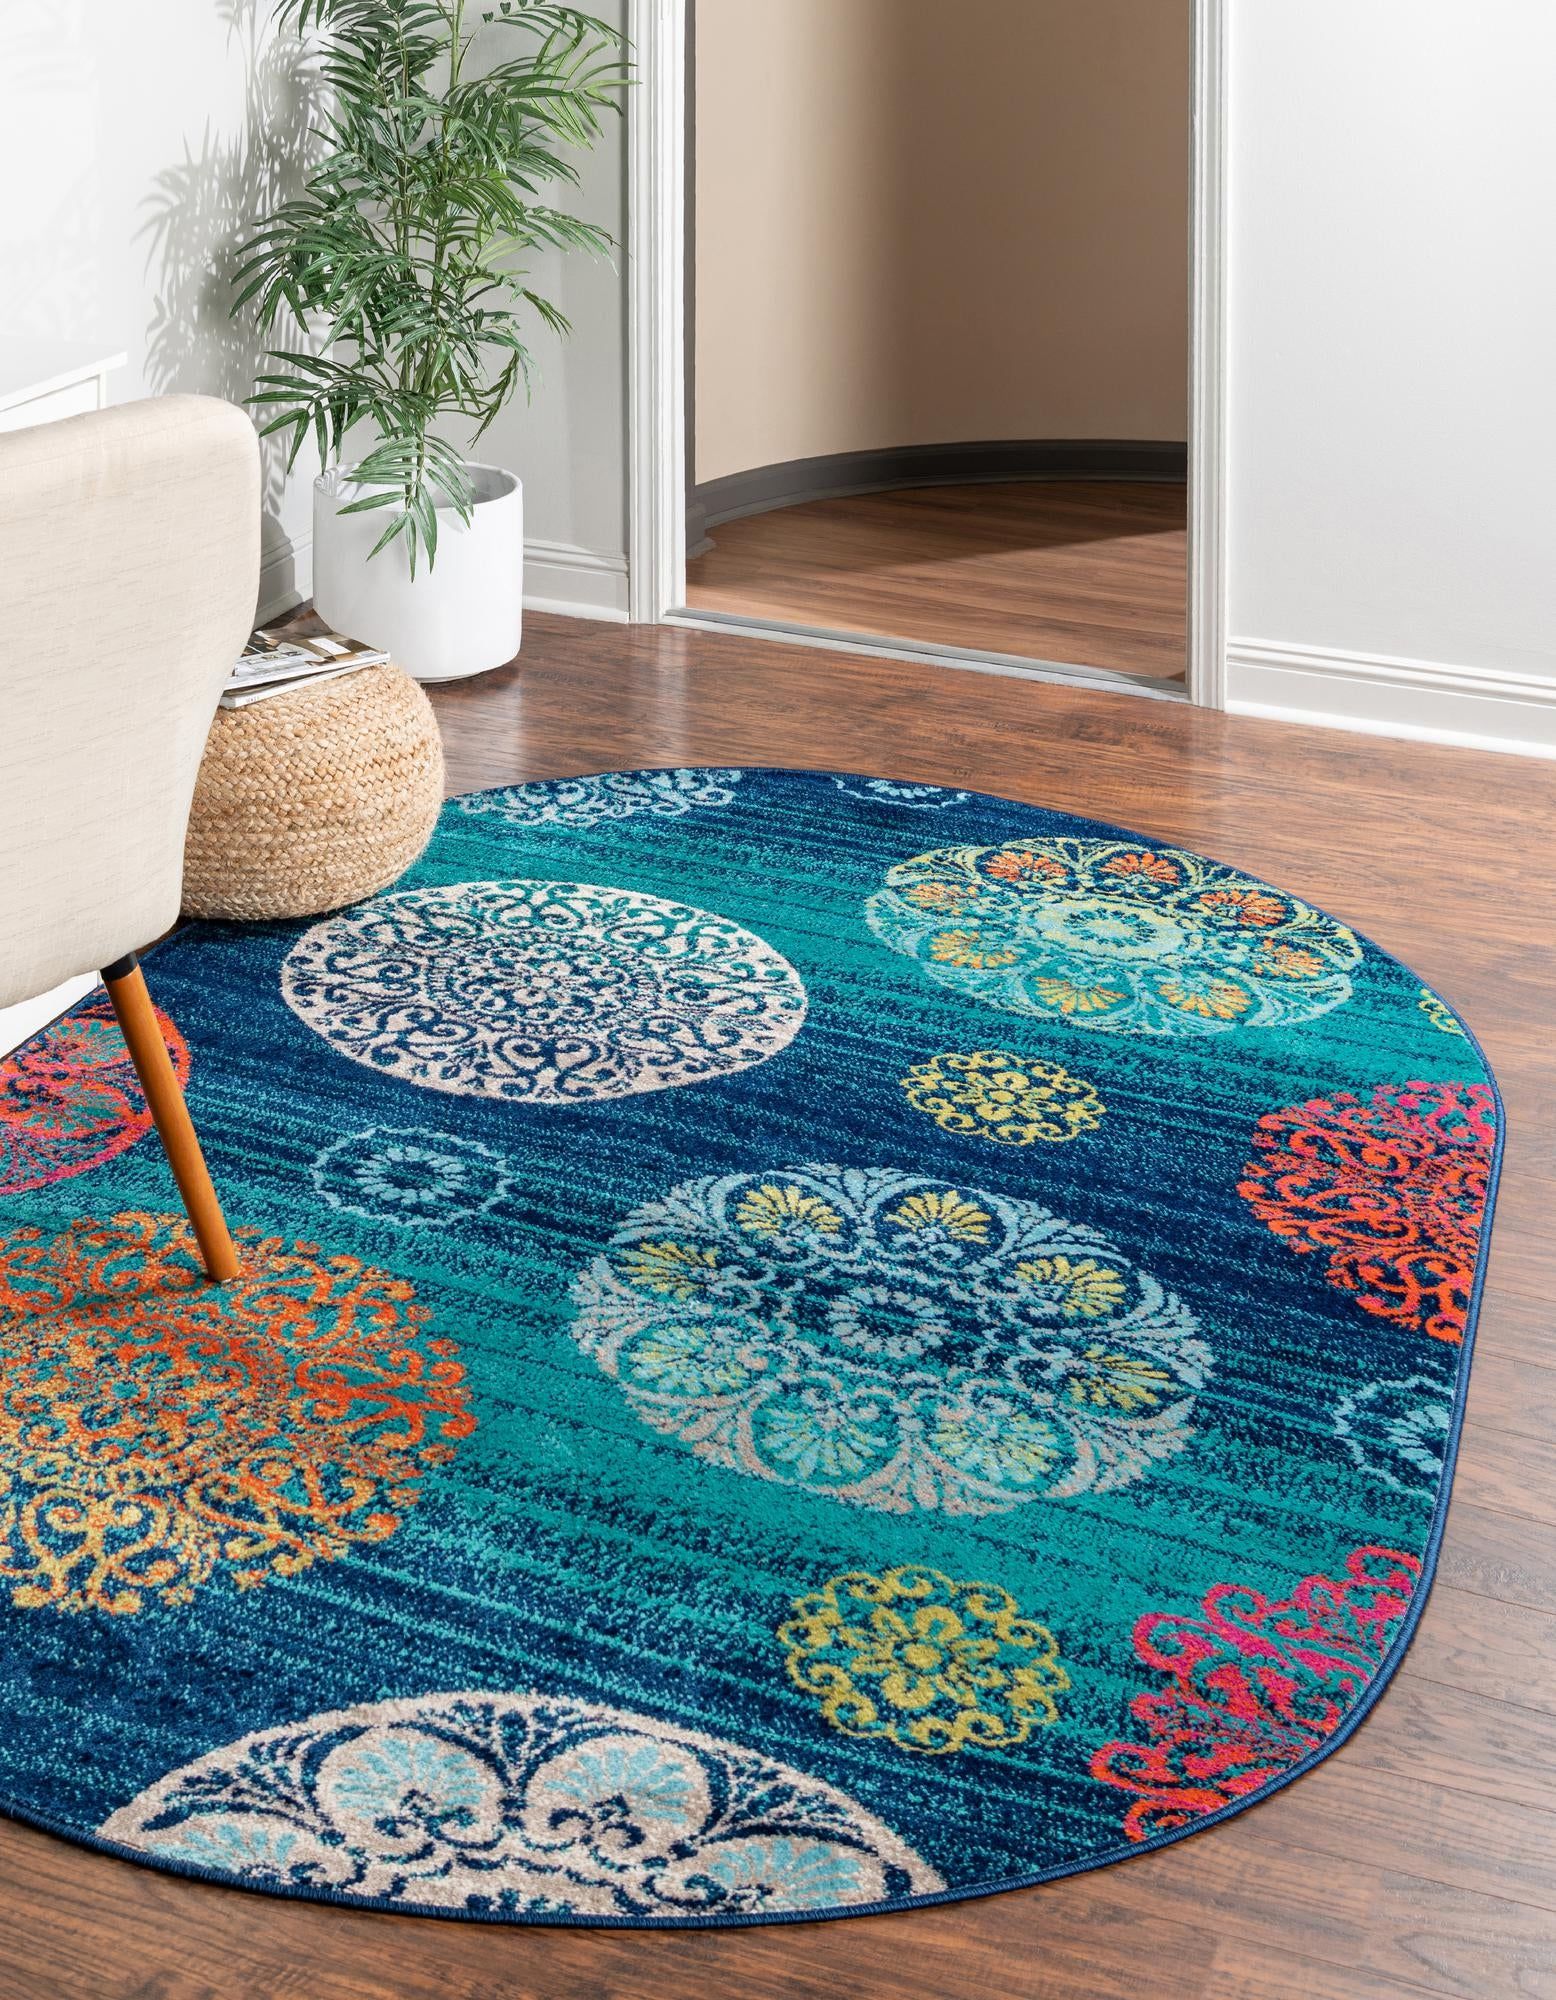 Unique Loom Aromi Azalea Rug Navy Blue/ivory 5' 3" X 8' Oval Botanical  Transitional Perfect For Dining Room Bed Room Kids Room Play Room –  Walmart Pertaining To Botanical Oval Rugs (View 10 of 15)